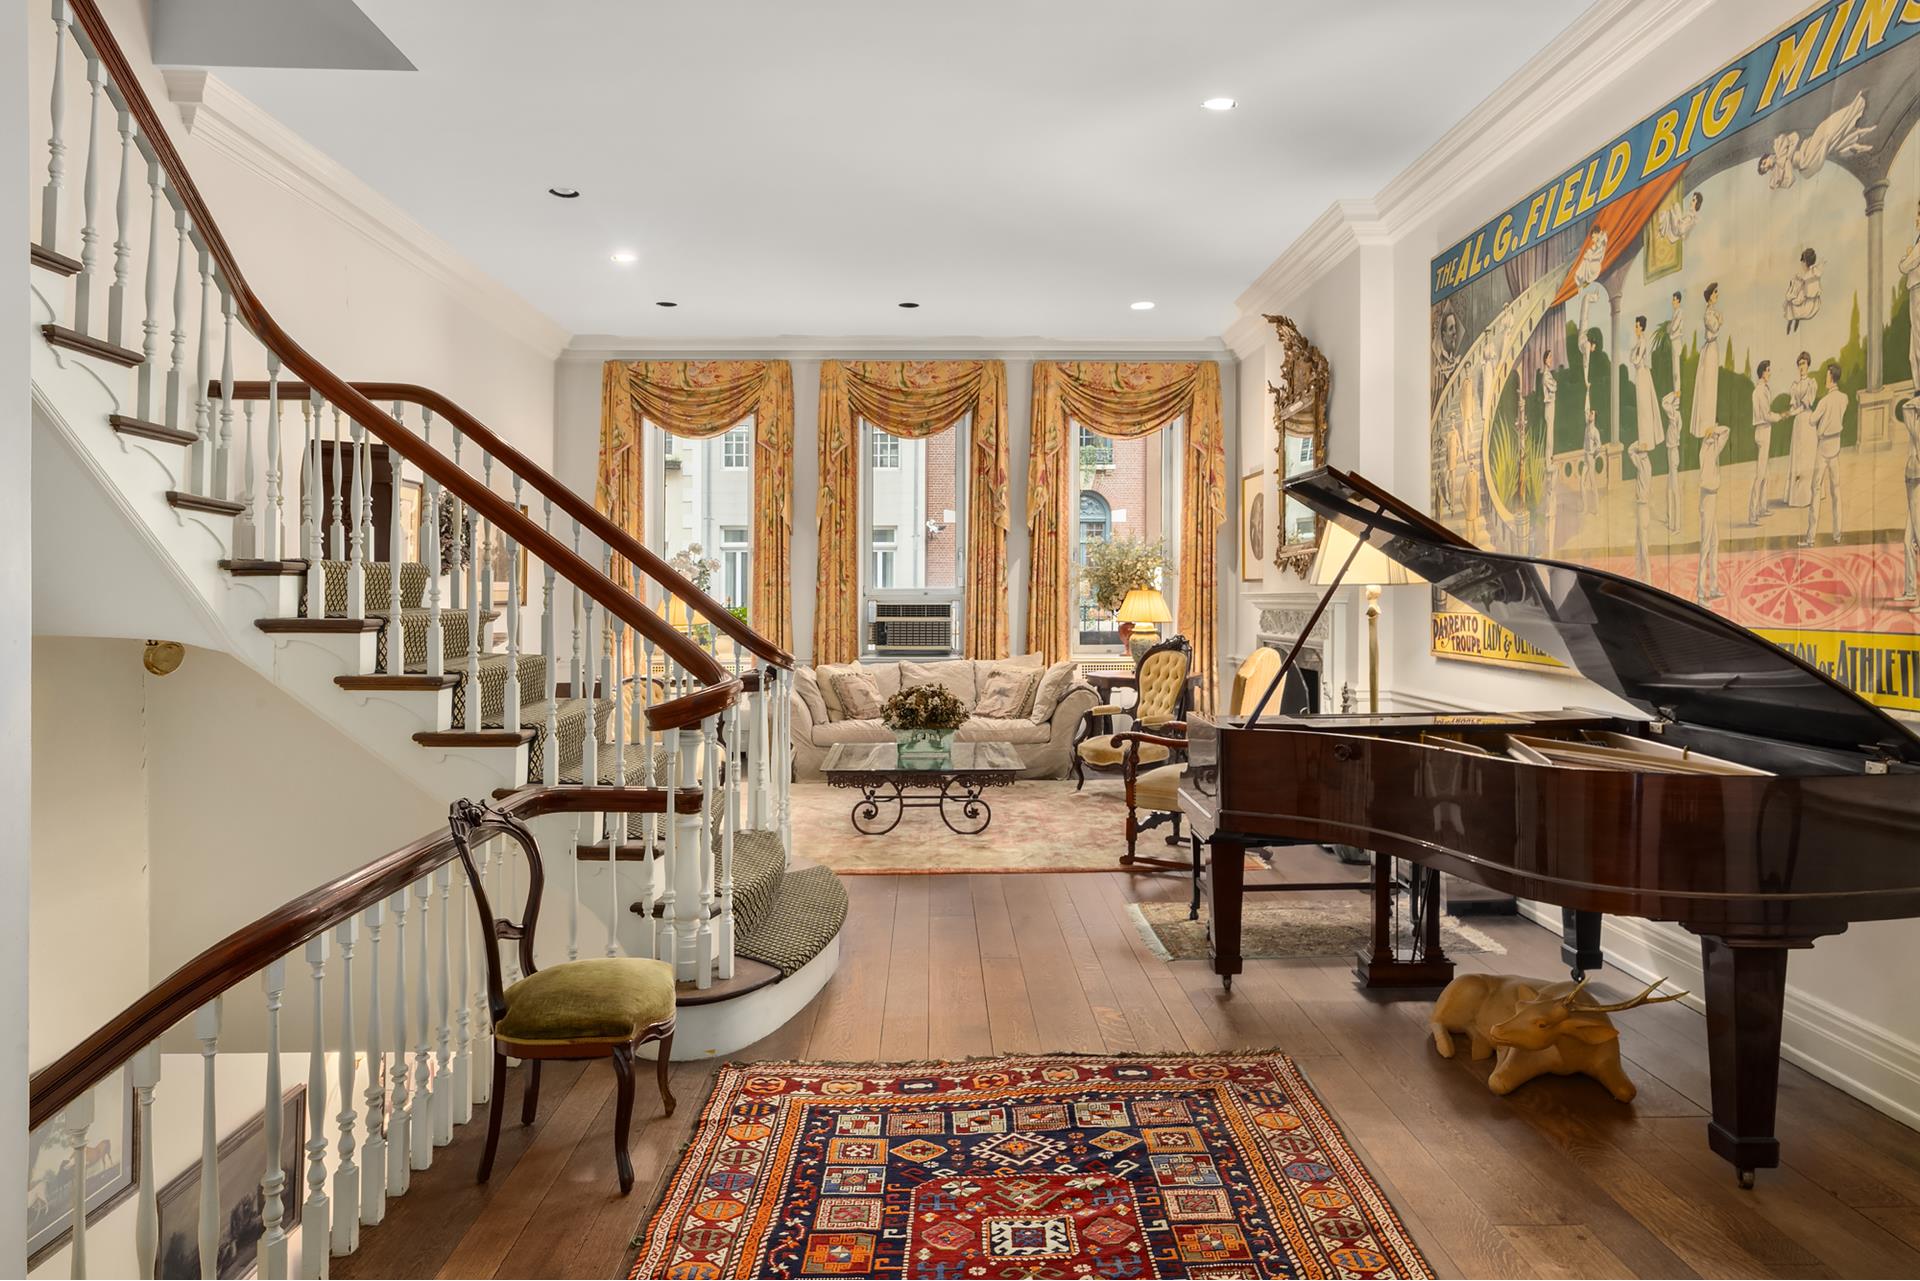 166 East 64th Street, Lenox Hill, Upper East Side, NYC - 5 Bedrooms  
3.5 Bathrooms  
12 Rooms - 